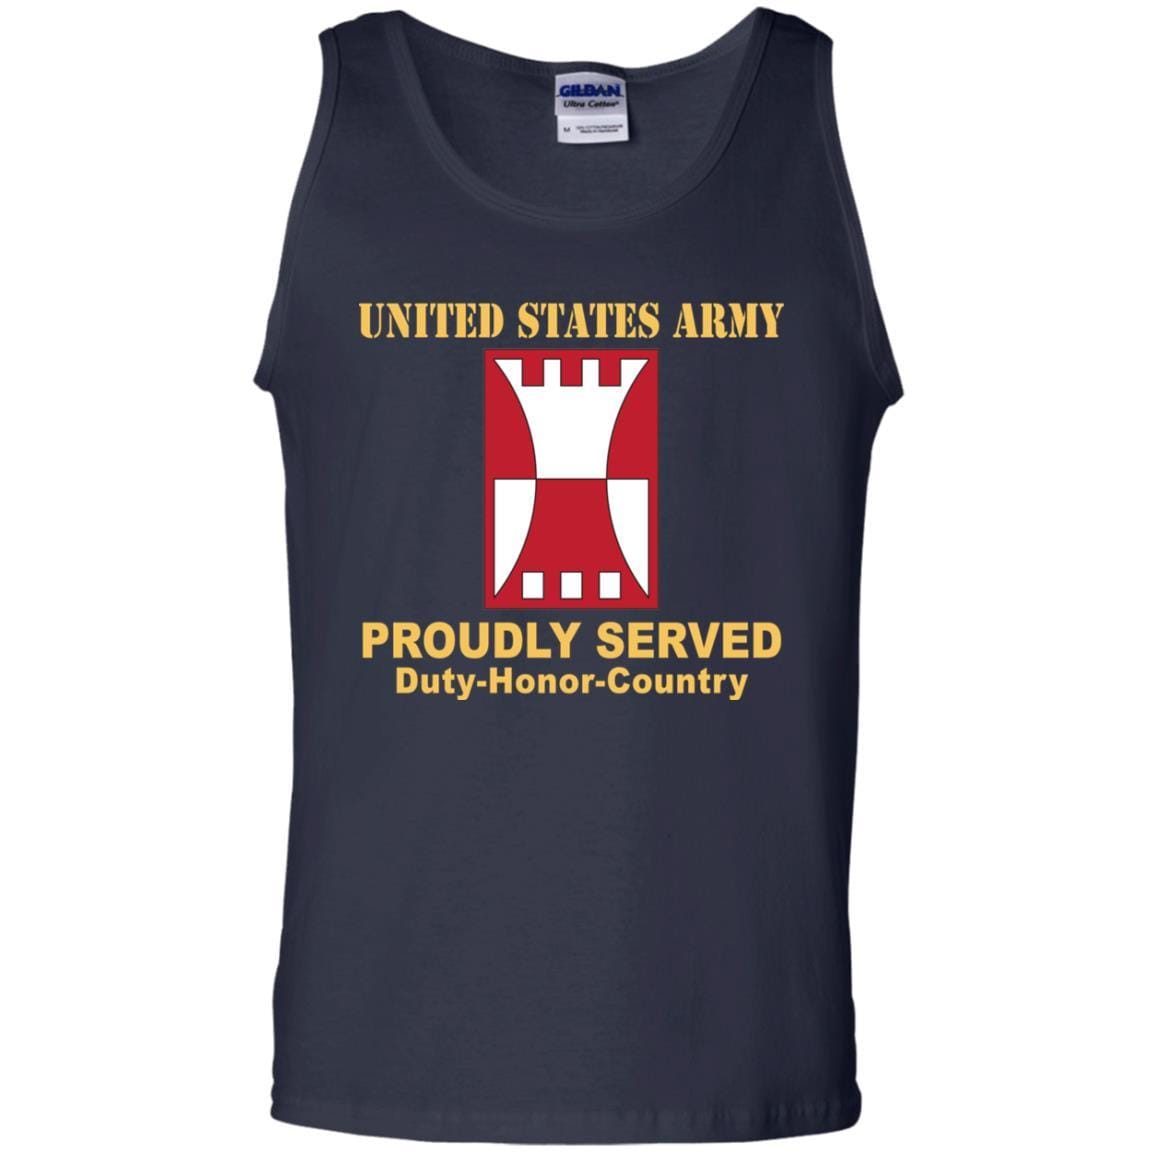 US ARMY 416 ENGINEER COMMAND- Proudly Served T-Shirt On Front For Men-TShirt-Army-Veterans Nation